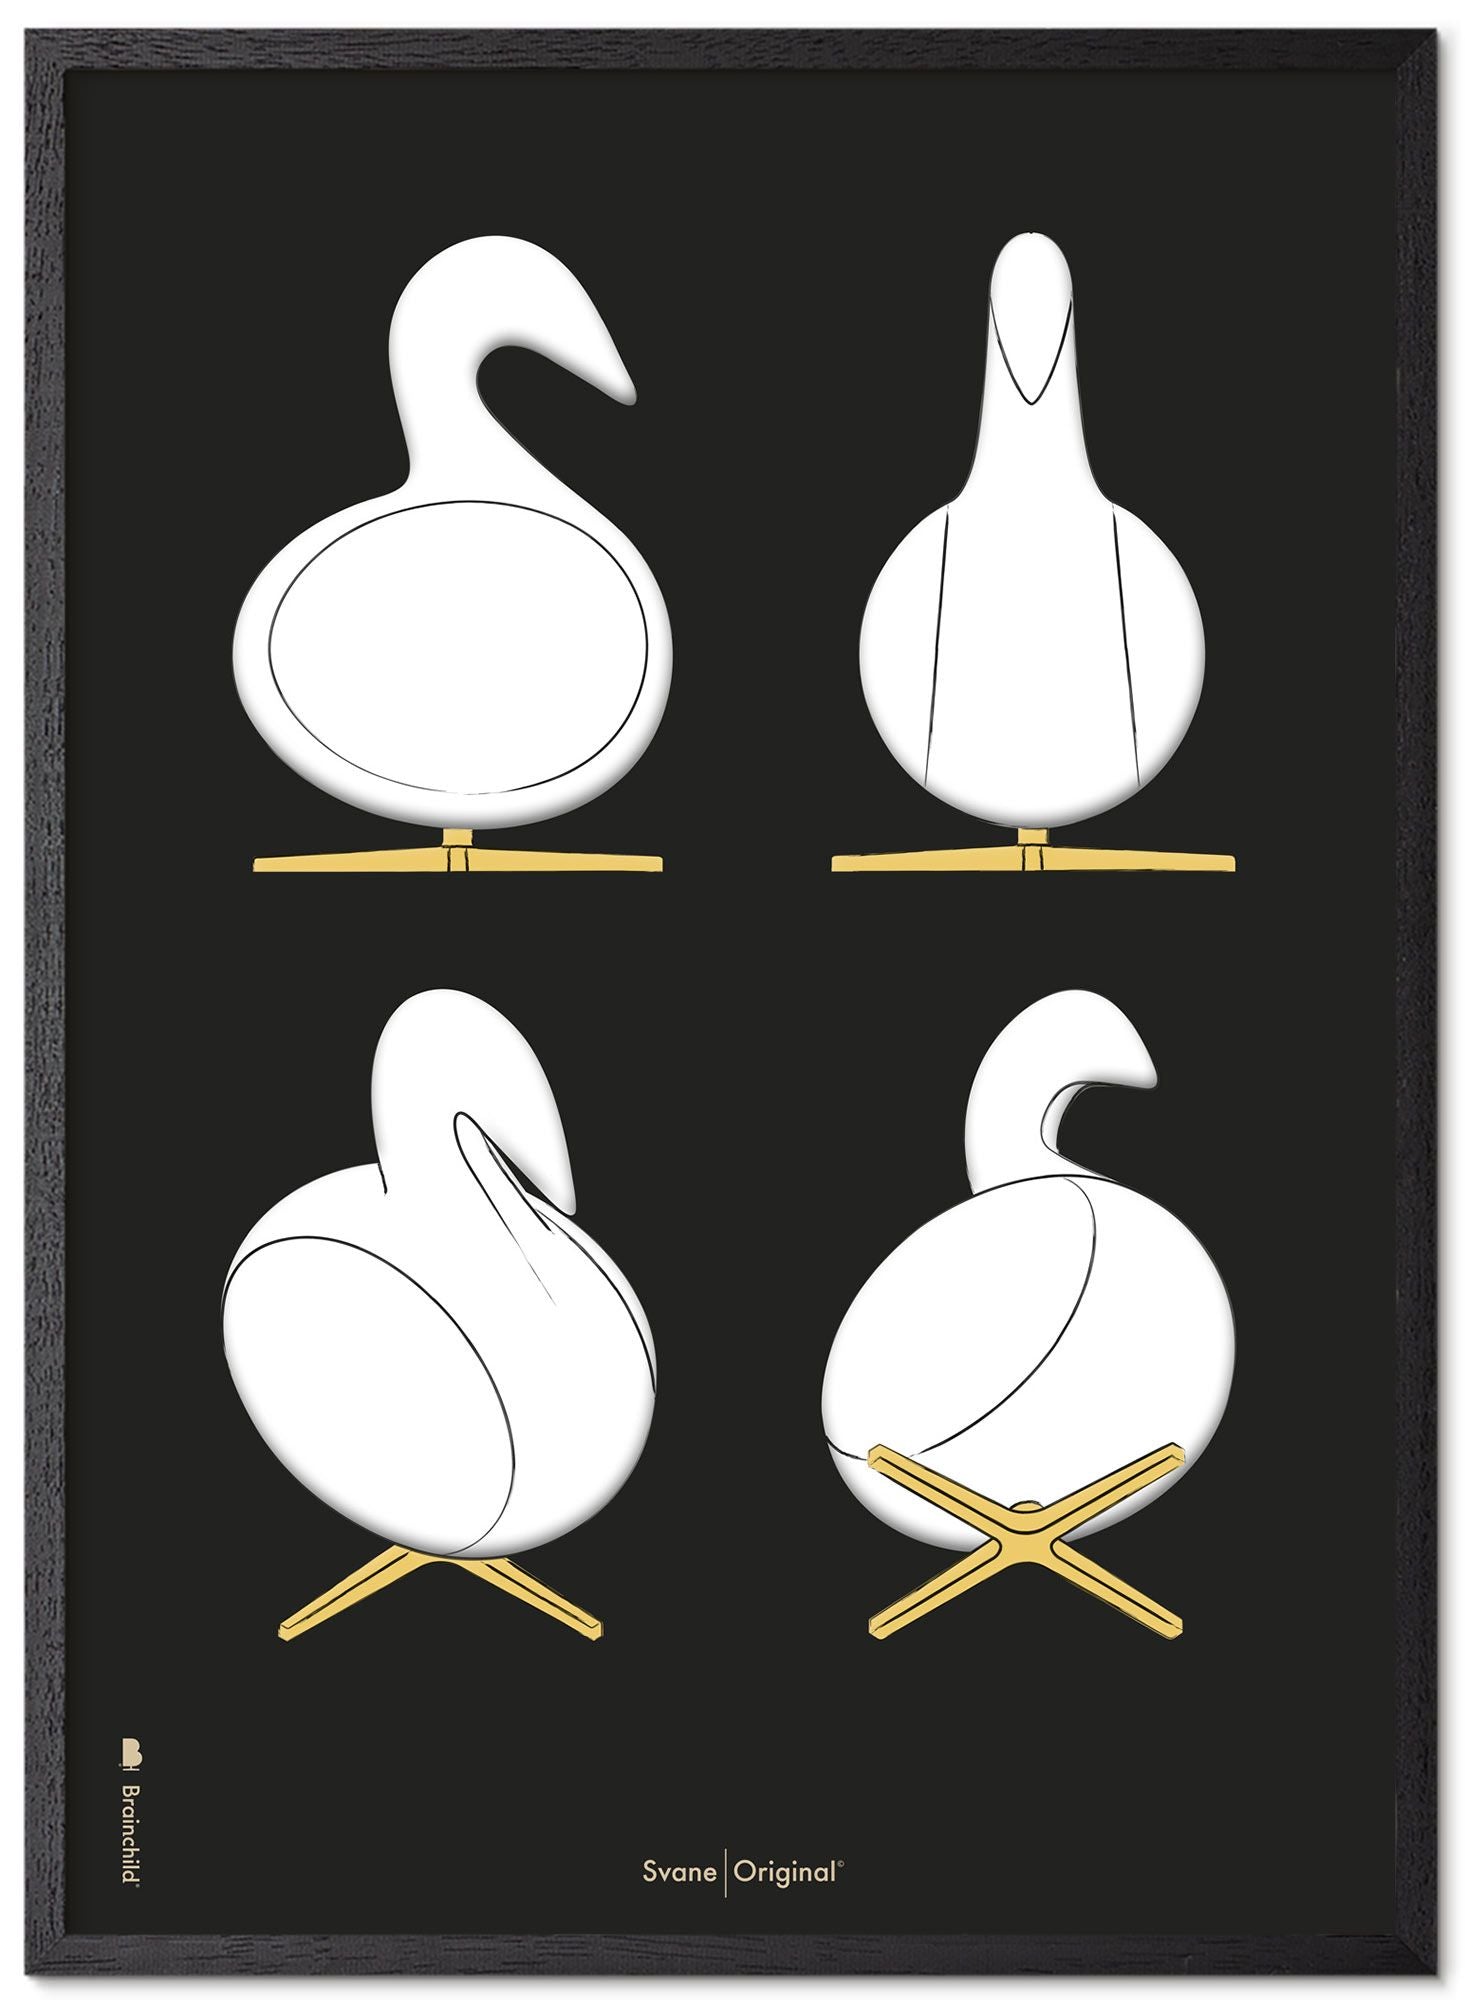 Brainchild The Swan Design Sketches Poster Frame Made Of Black Lacquered Wood 70x100 Cm, Black Background